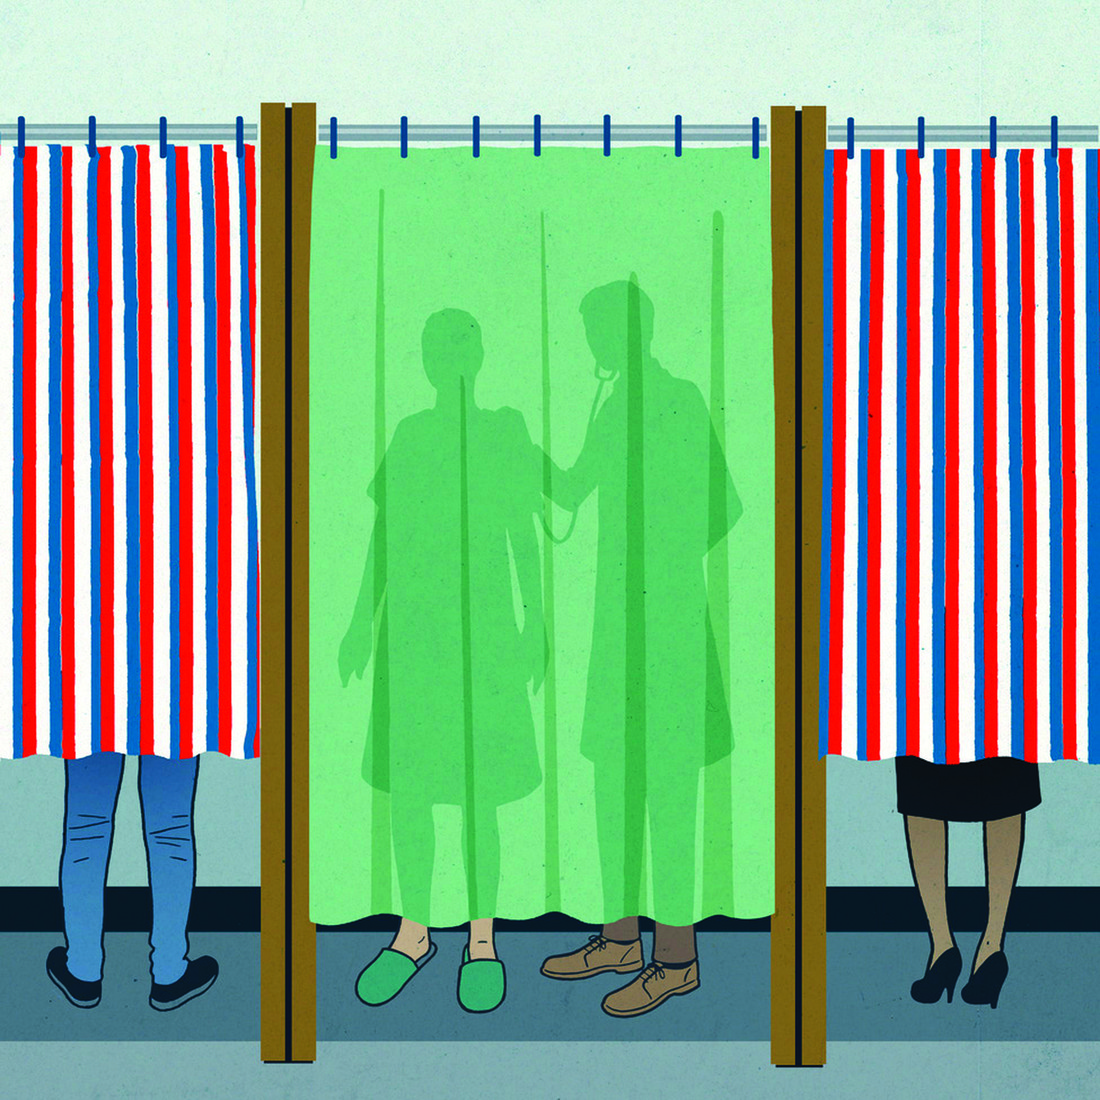 Health and voting